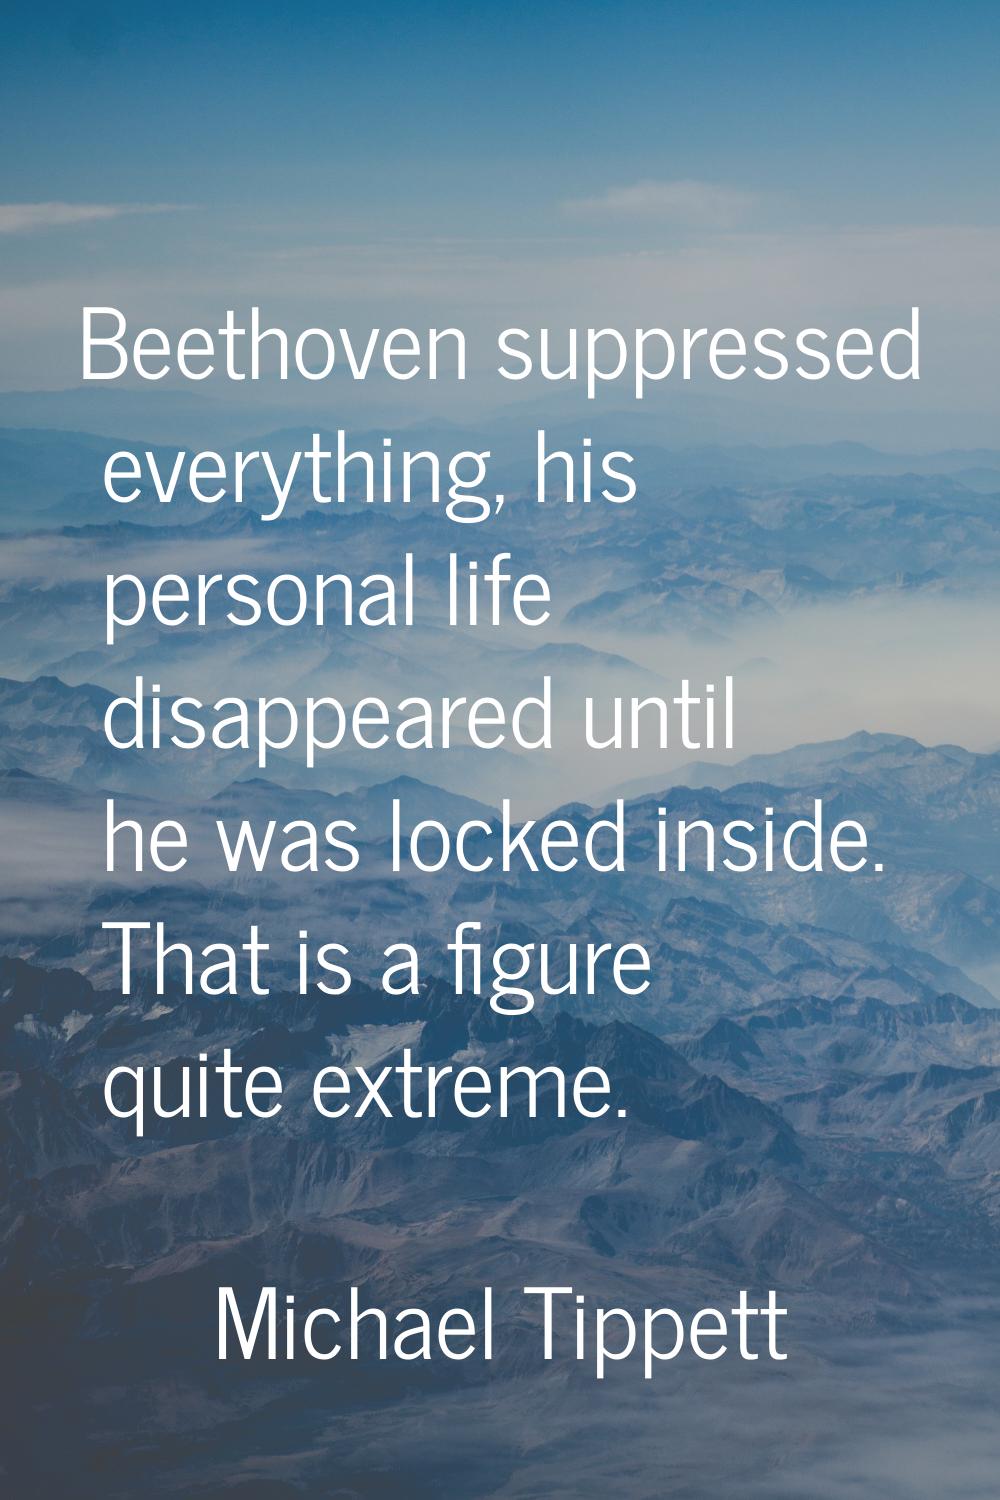 Beethoven suppressed everything, his personal life disappeared until he was locked inside. That is 